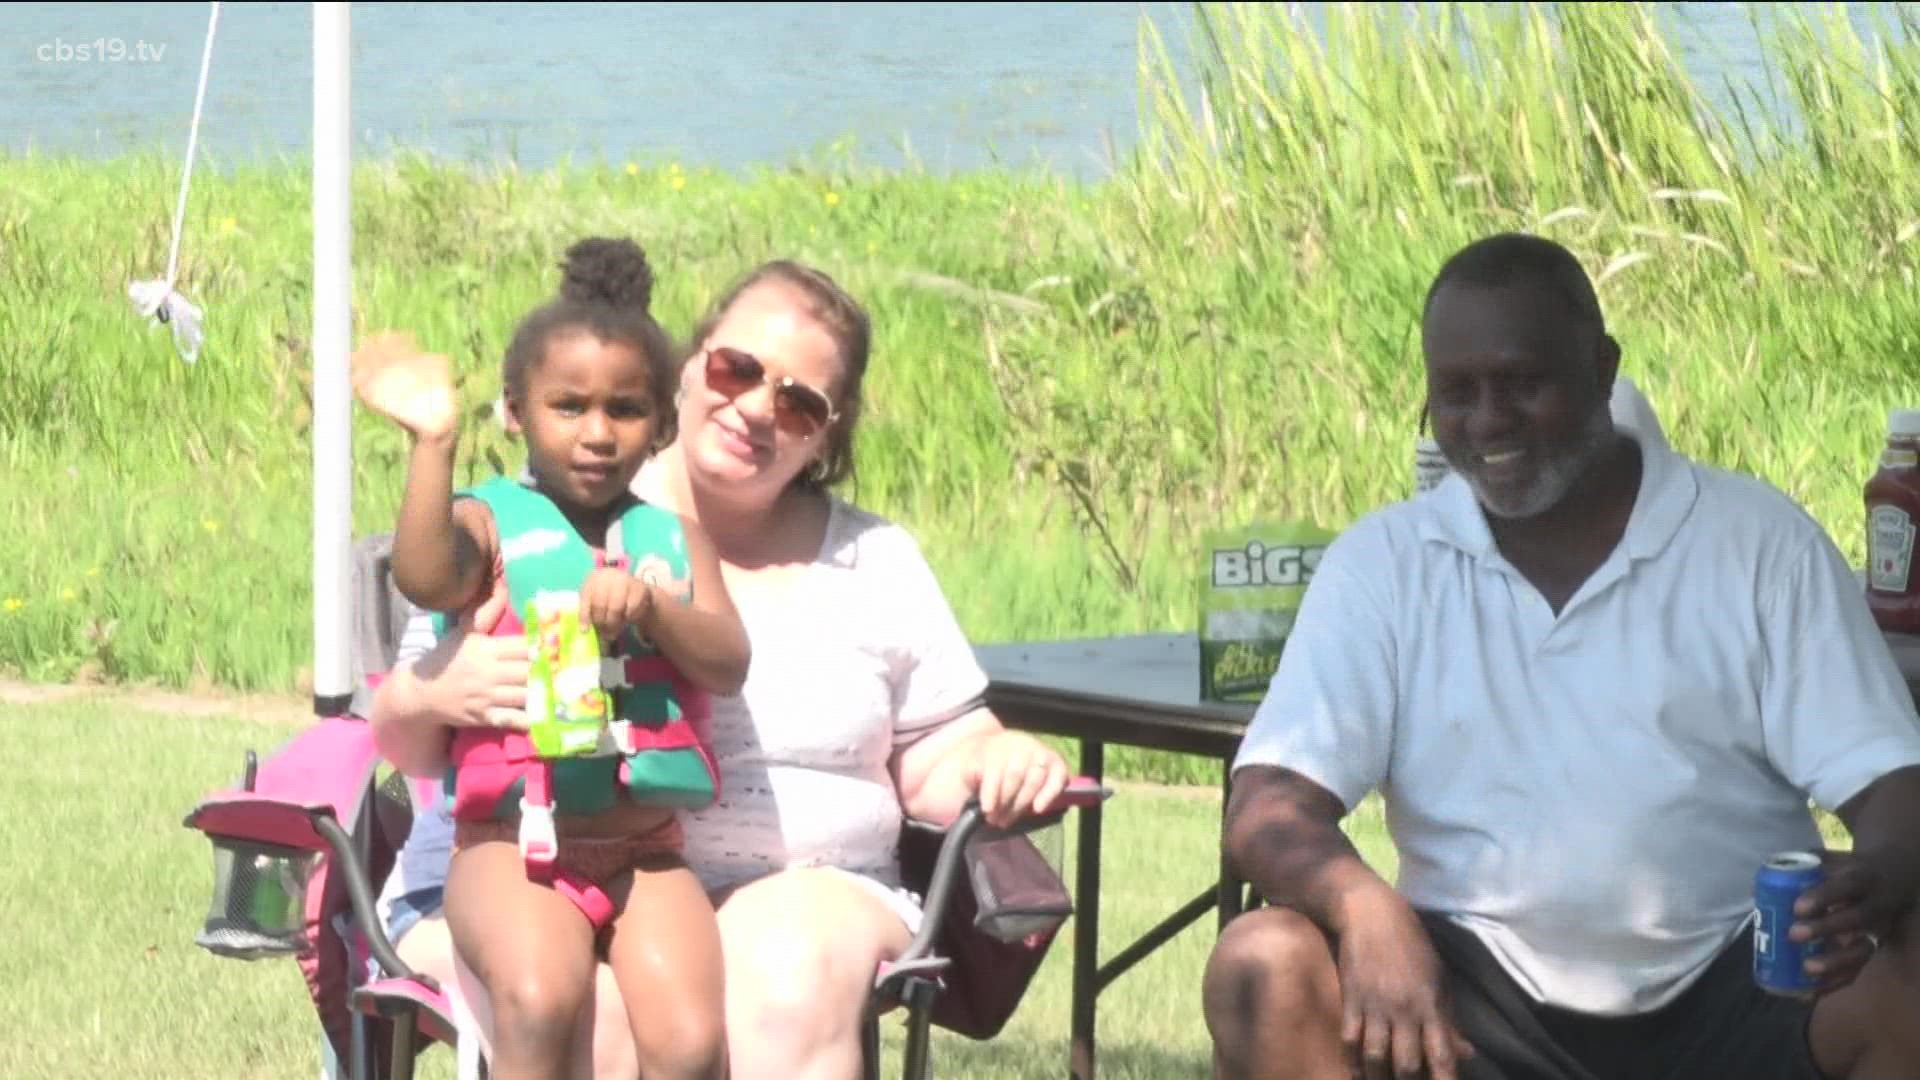 Labor Day may be called the unofficial end of Summer but you wouldn't know it looking at Lake Tyler today! Colleen Campbell spoke with locals enjoying their holiday